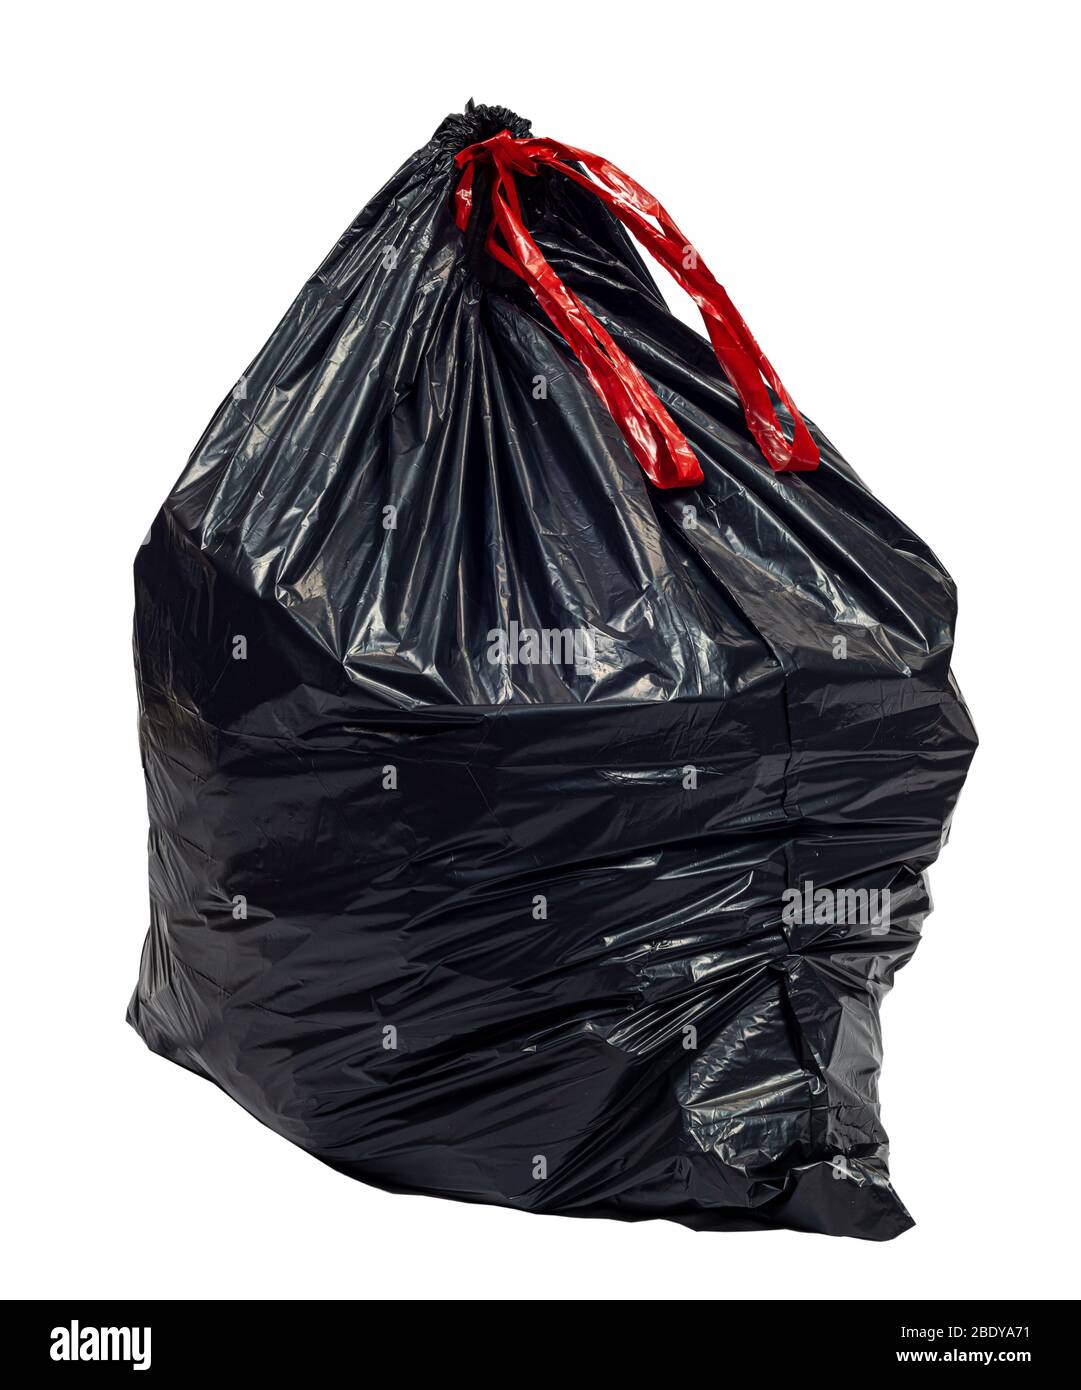 https://c8.alamy.com/comp/2BDYA71/vertical-shot-of-a-full-black-trash-bag-with-the-top-closed-red-ties-isolated-on-white-2BDYA71.jpg